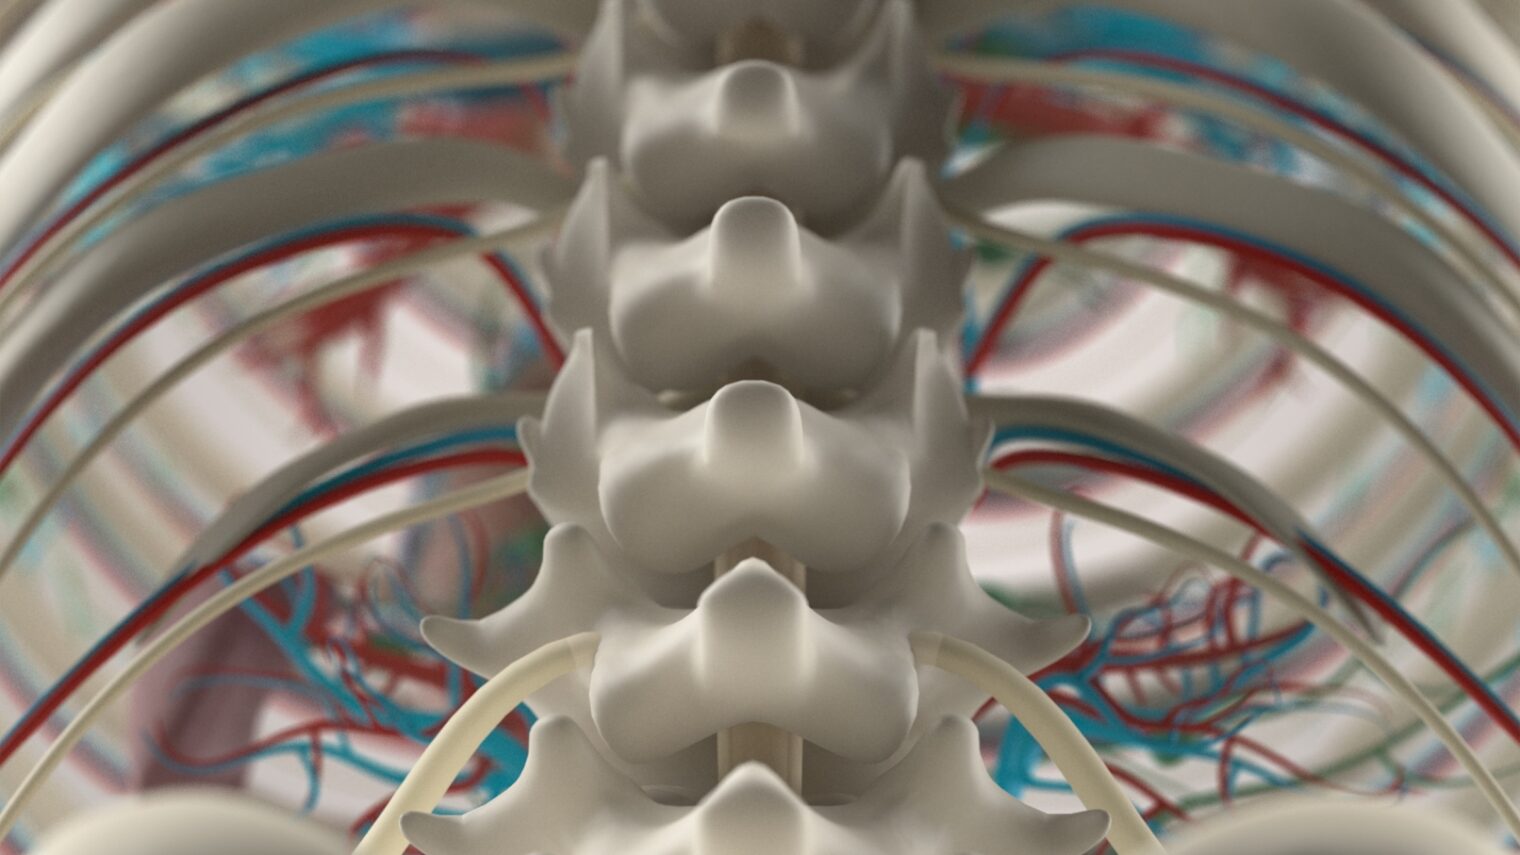 Spinal cord image by Anatomy Insider/Shutterstock.com